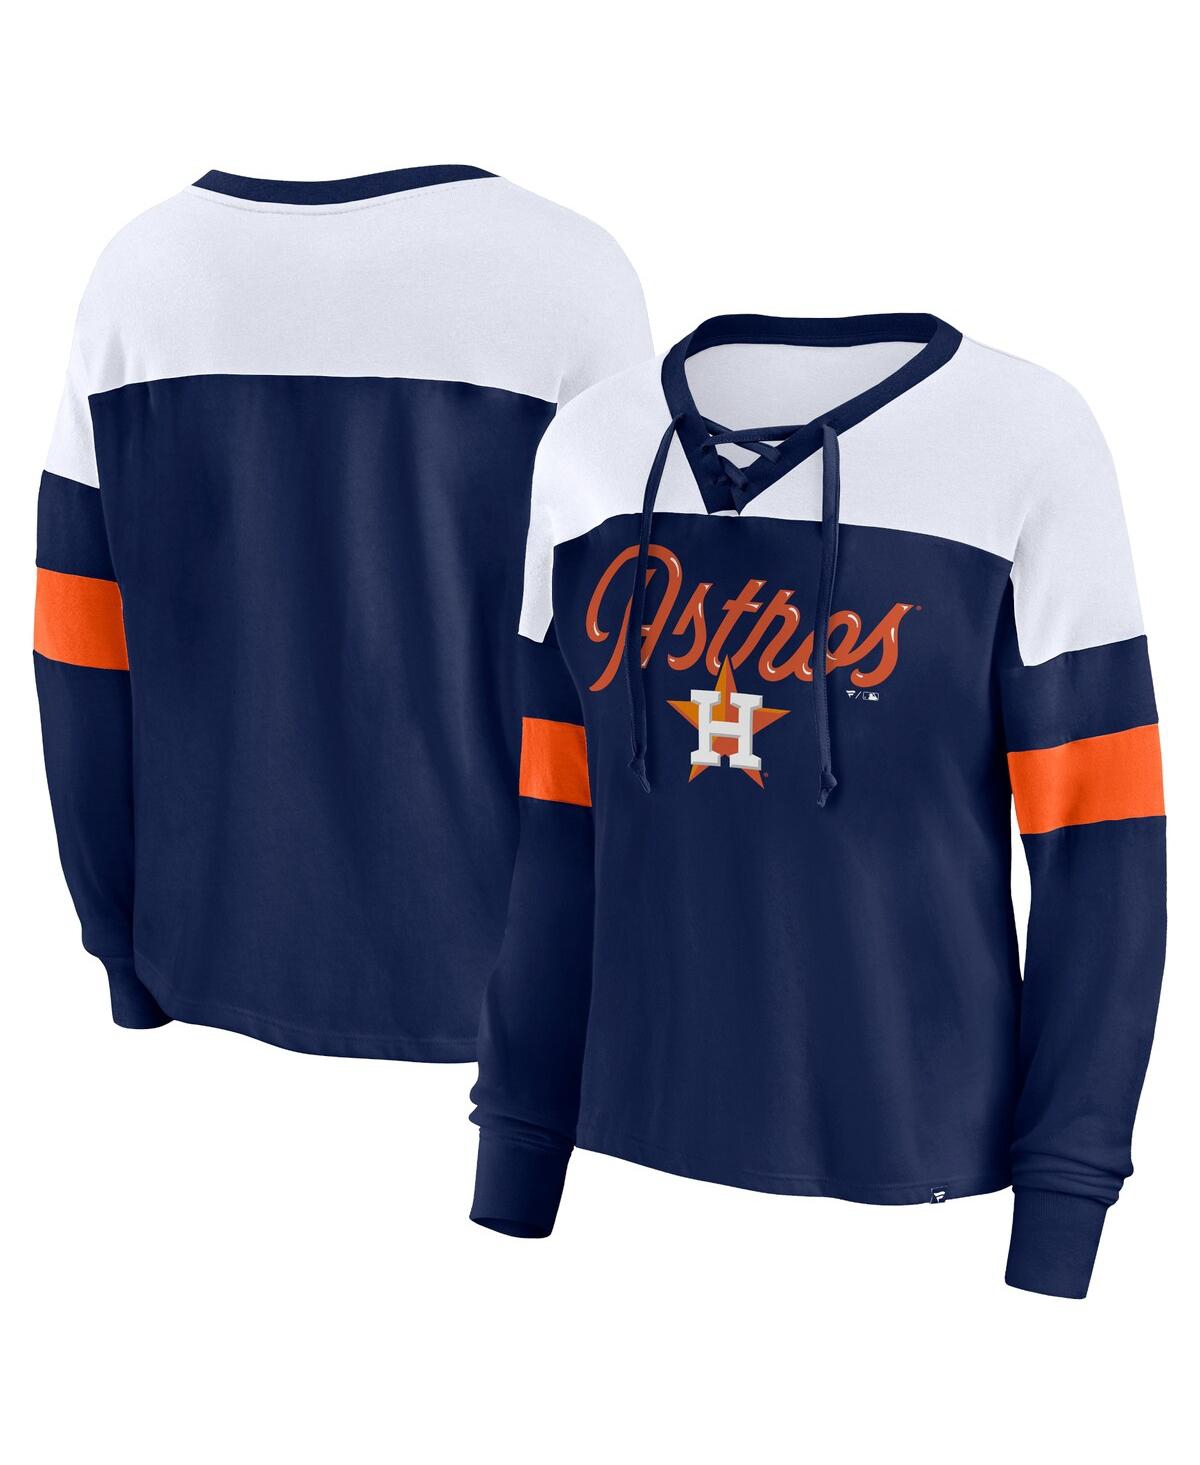 Fanatics Women's Branded Navy, White Houston Astros Even Match Lace-up Long  Sleeve V-neck T-shirt In Navy,white